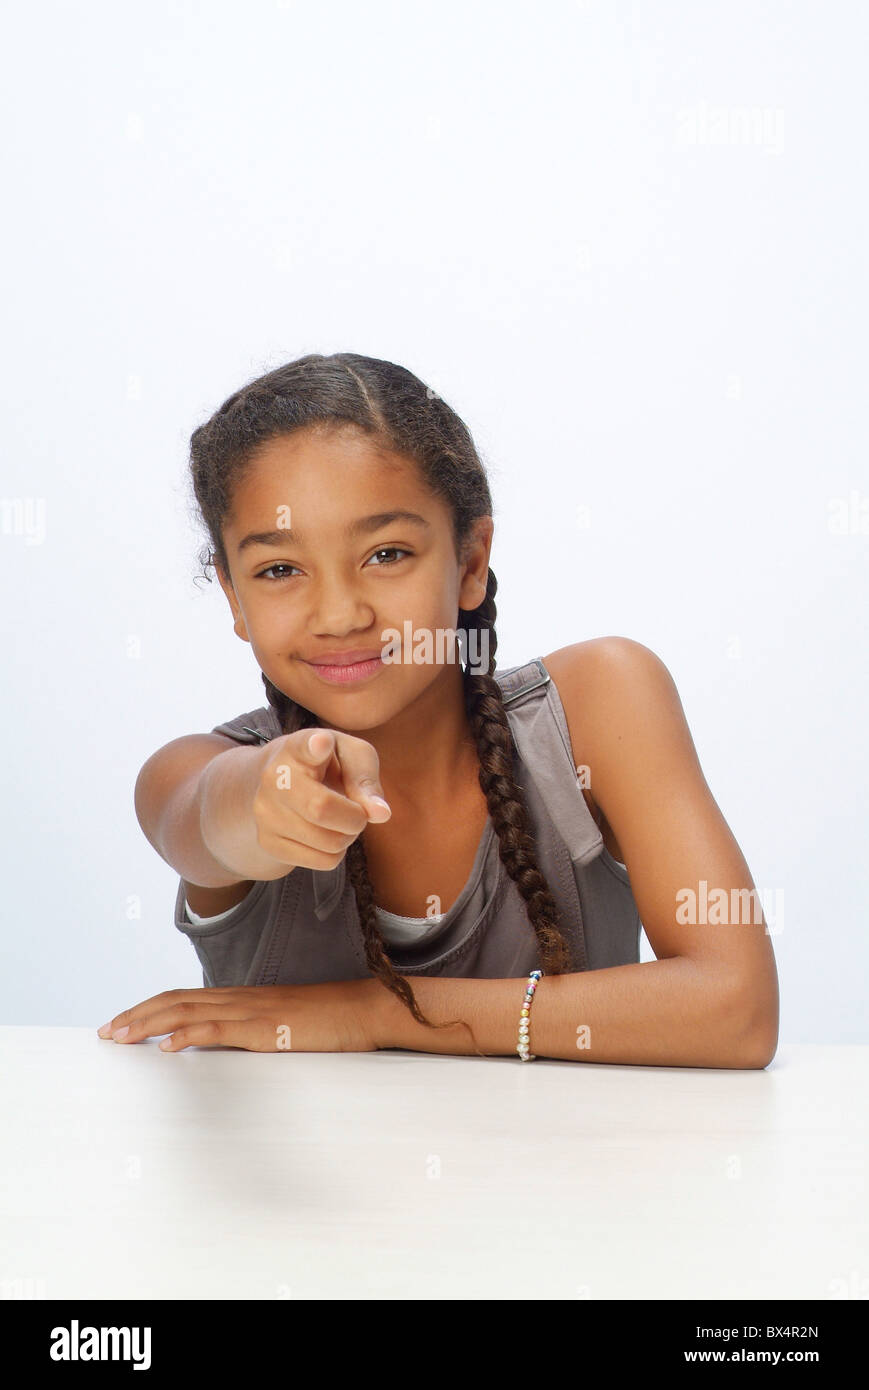 Portrait of a girl with upraised forefinger Stock Photo